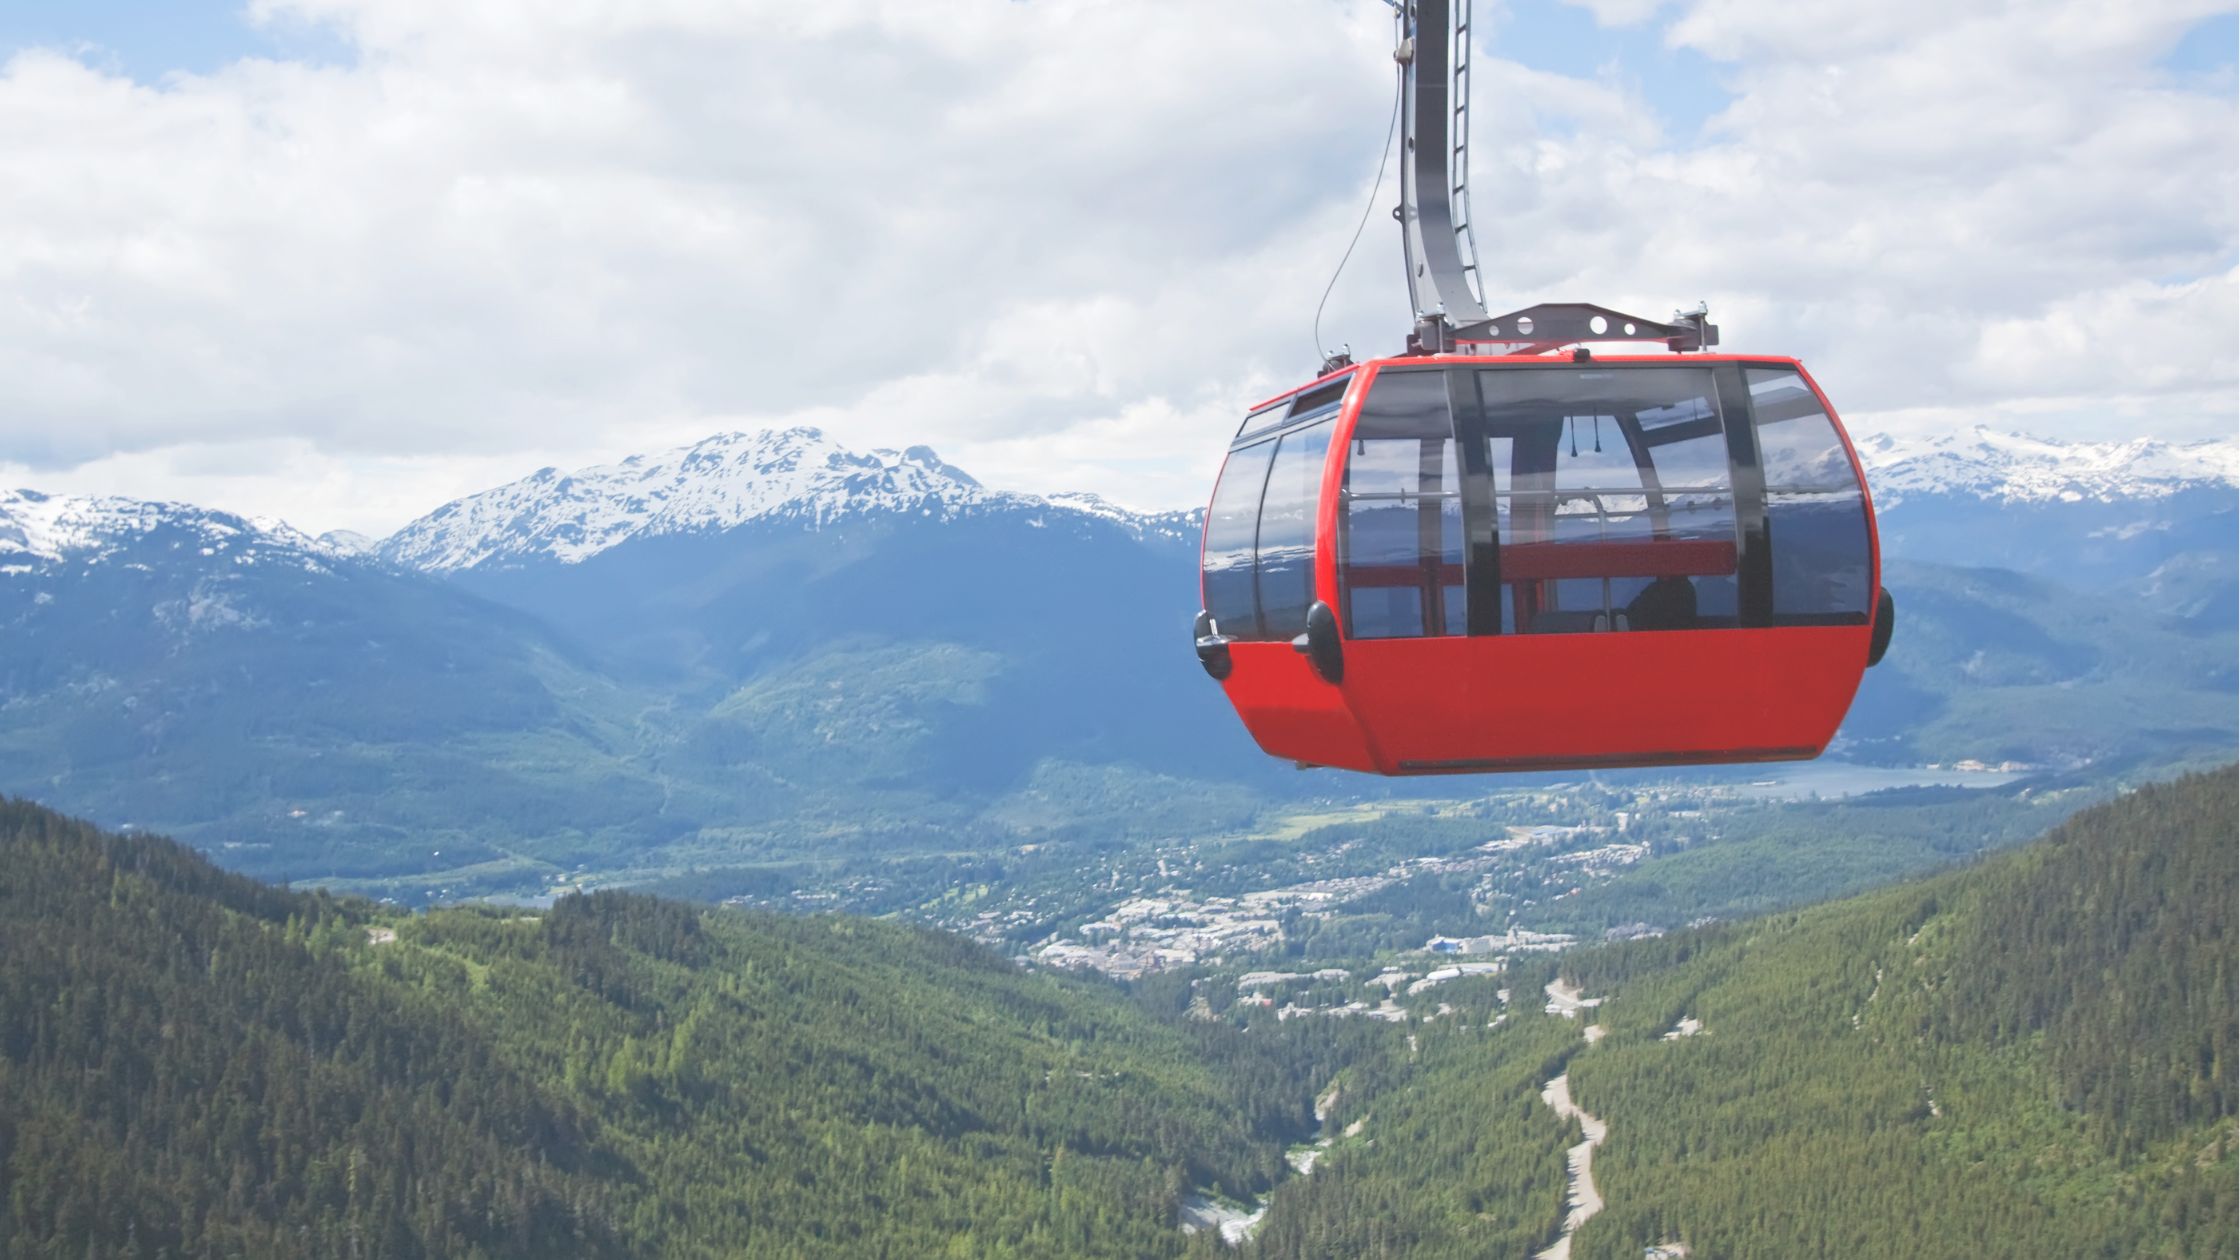 An image of the gondola in Whistler